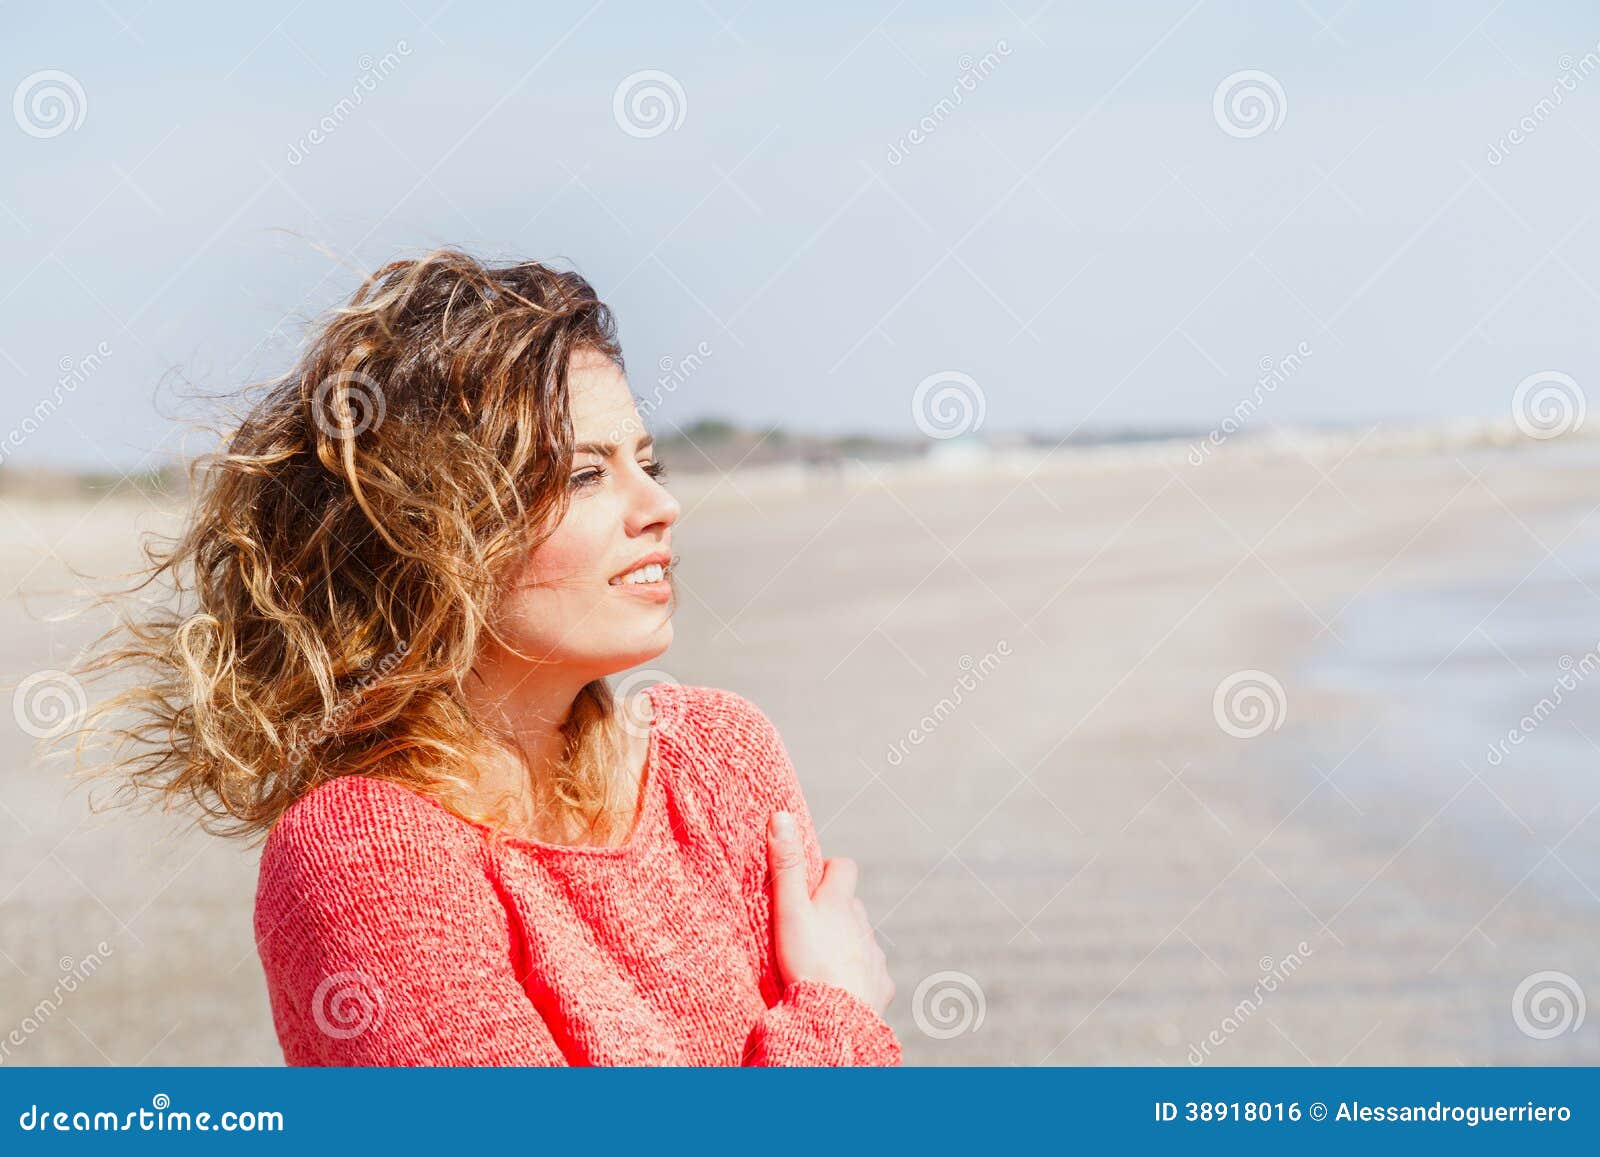 Young Wind  Hair  Girl  On The Seaside Stock Photo Image of 